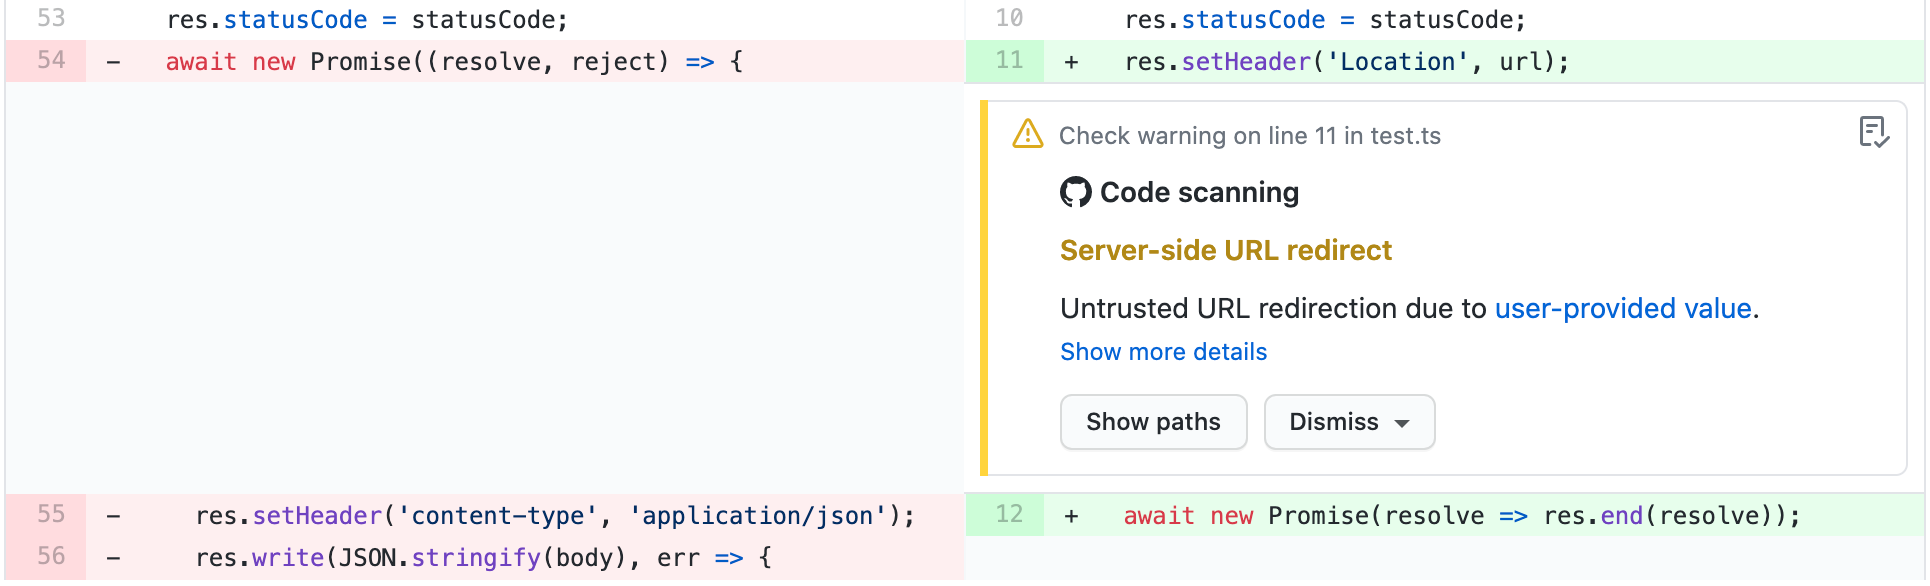 Alert annotation within a pull request diff